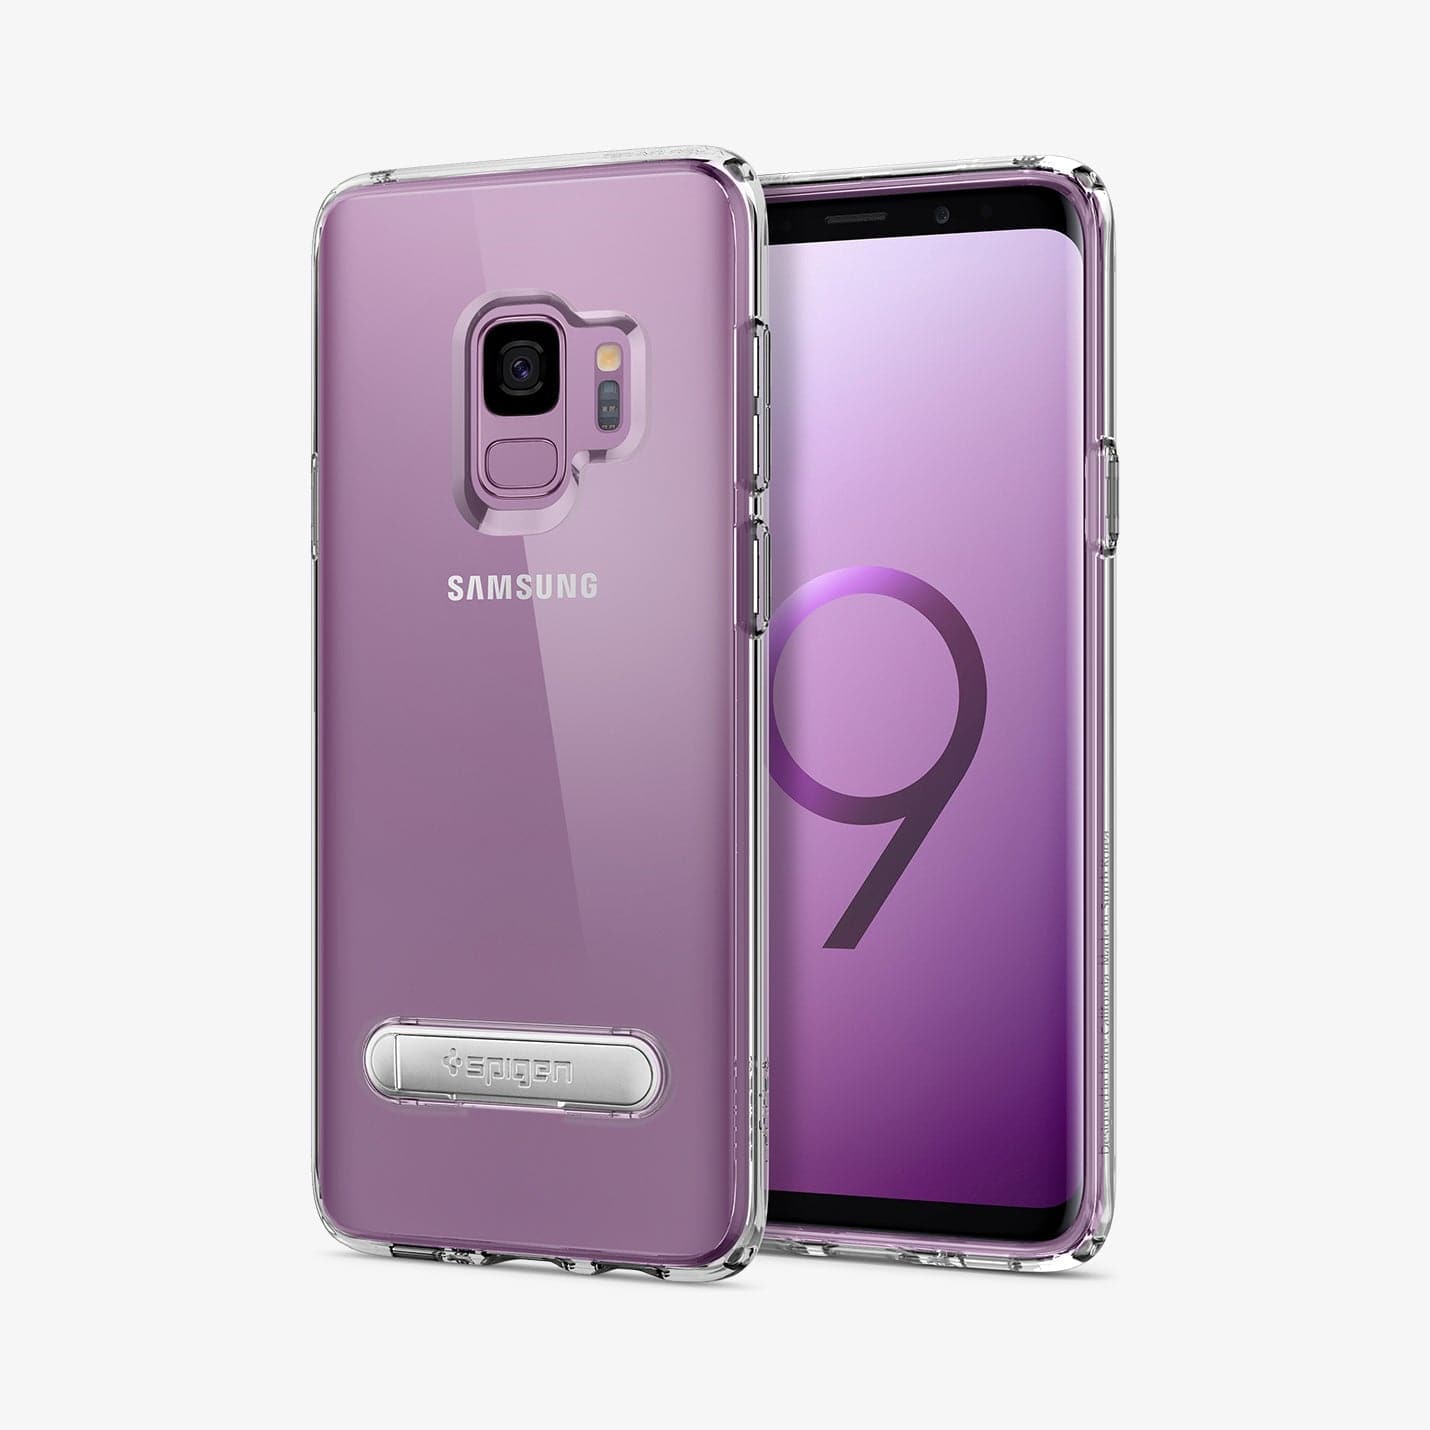 592CS22841 - Galaxy S9 Series Ultra Hybrid S Case in crystal clear showing the back and front